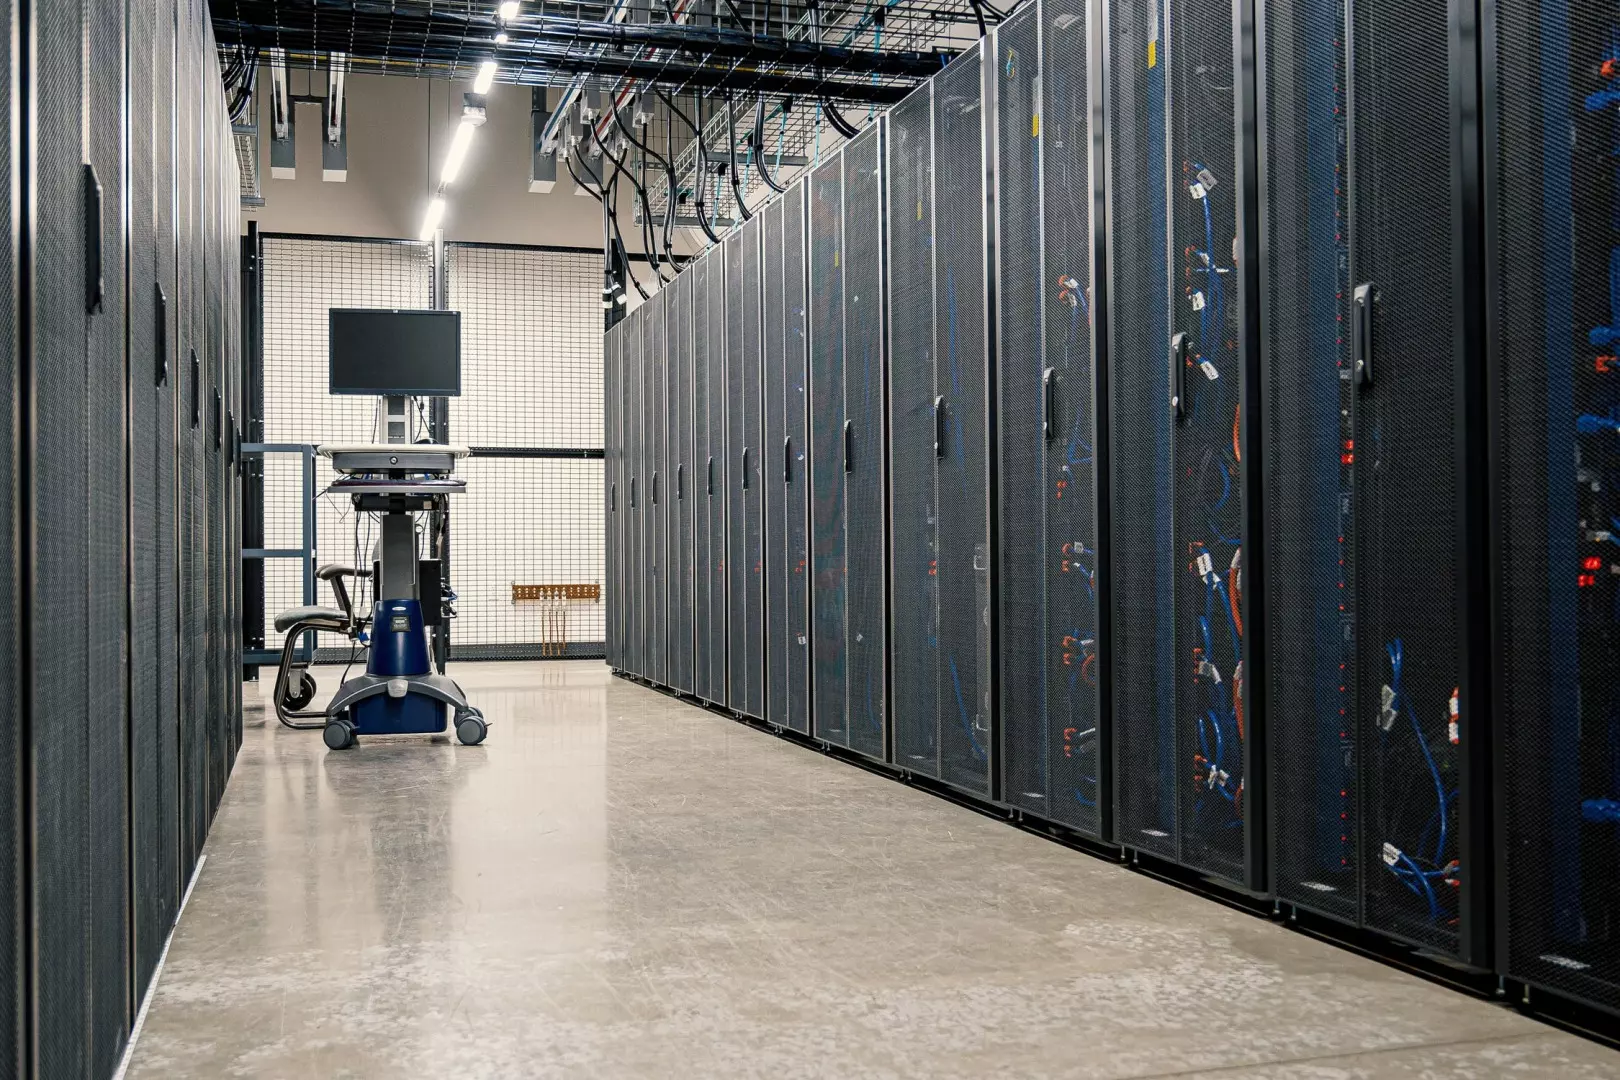 5 Ways To Accurately Process Data at Scale in Your Data Center